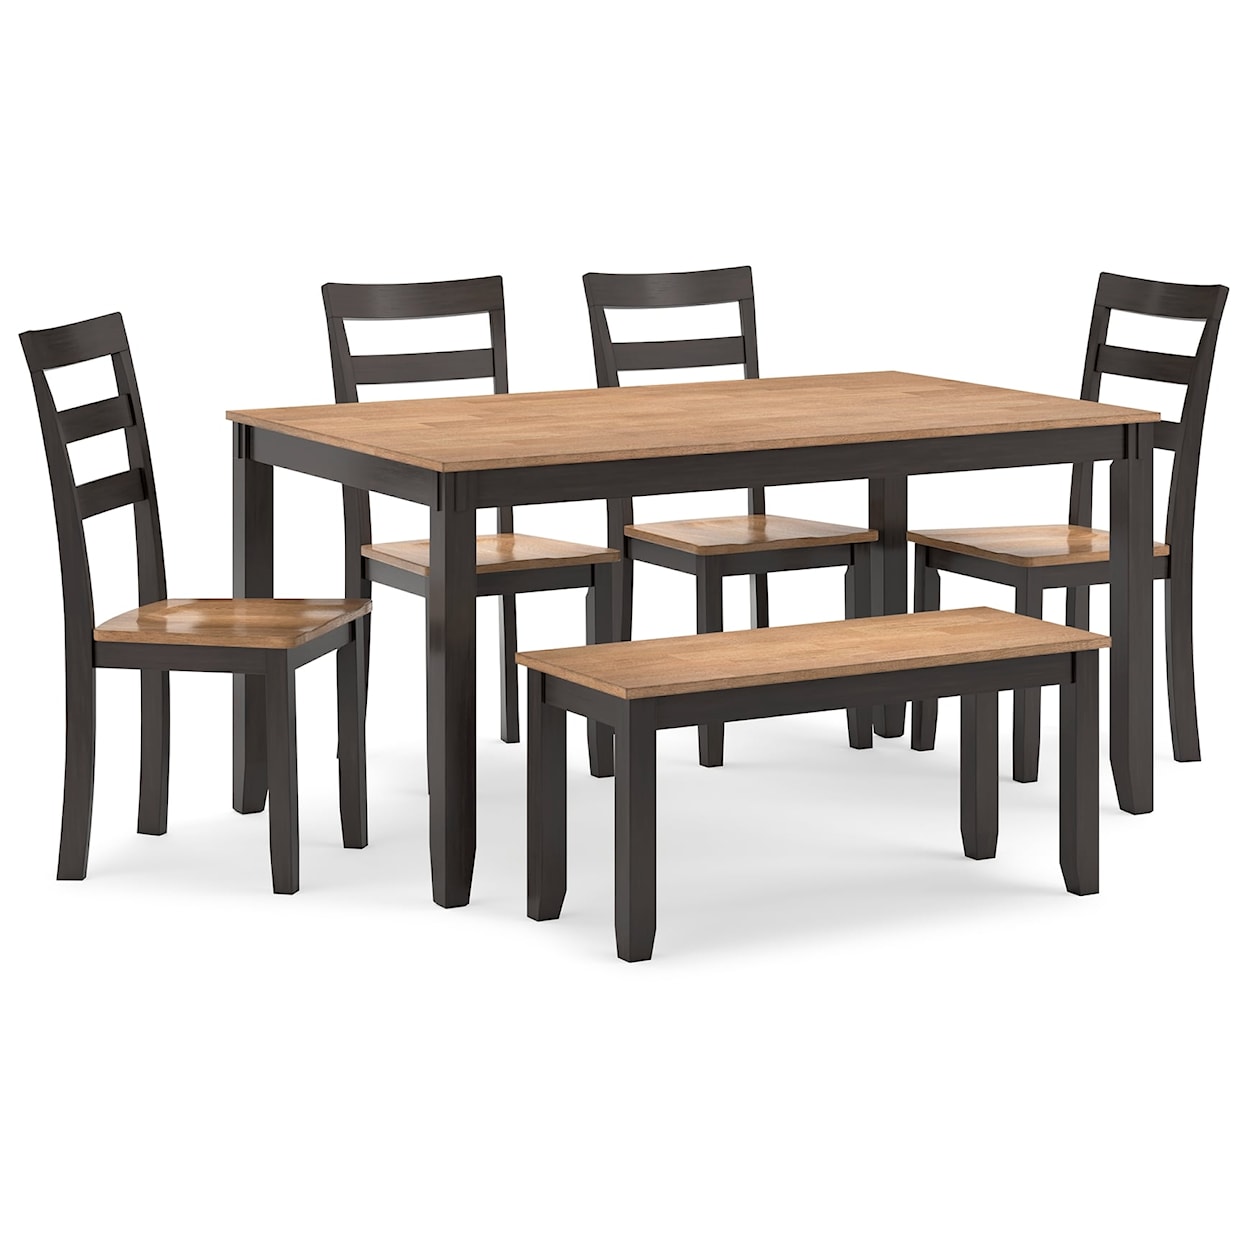 Benchcraft Gesthaven Dining Room Table Set (Set of 6)